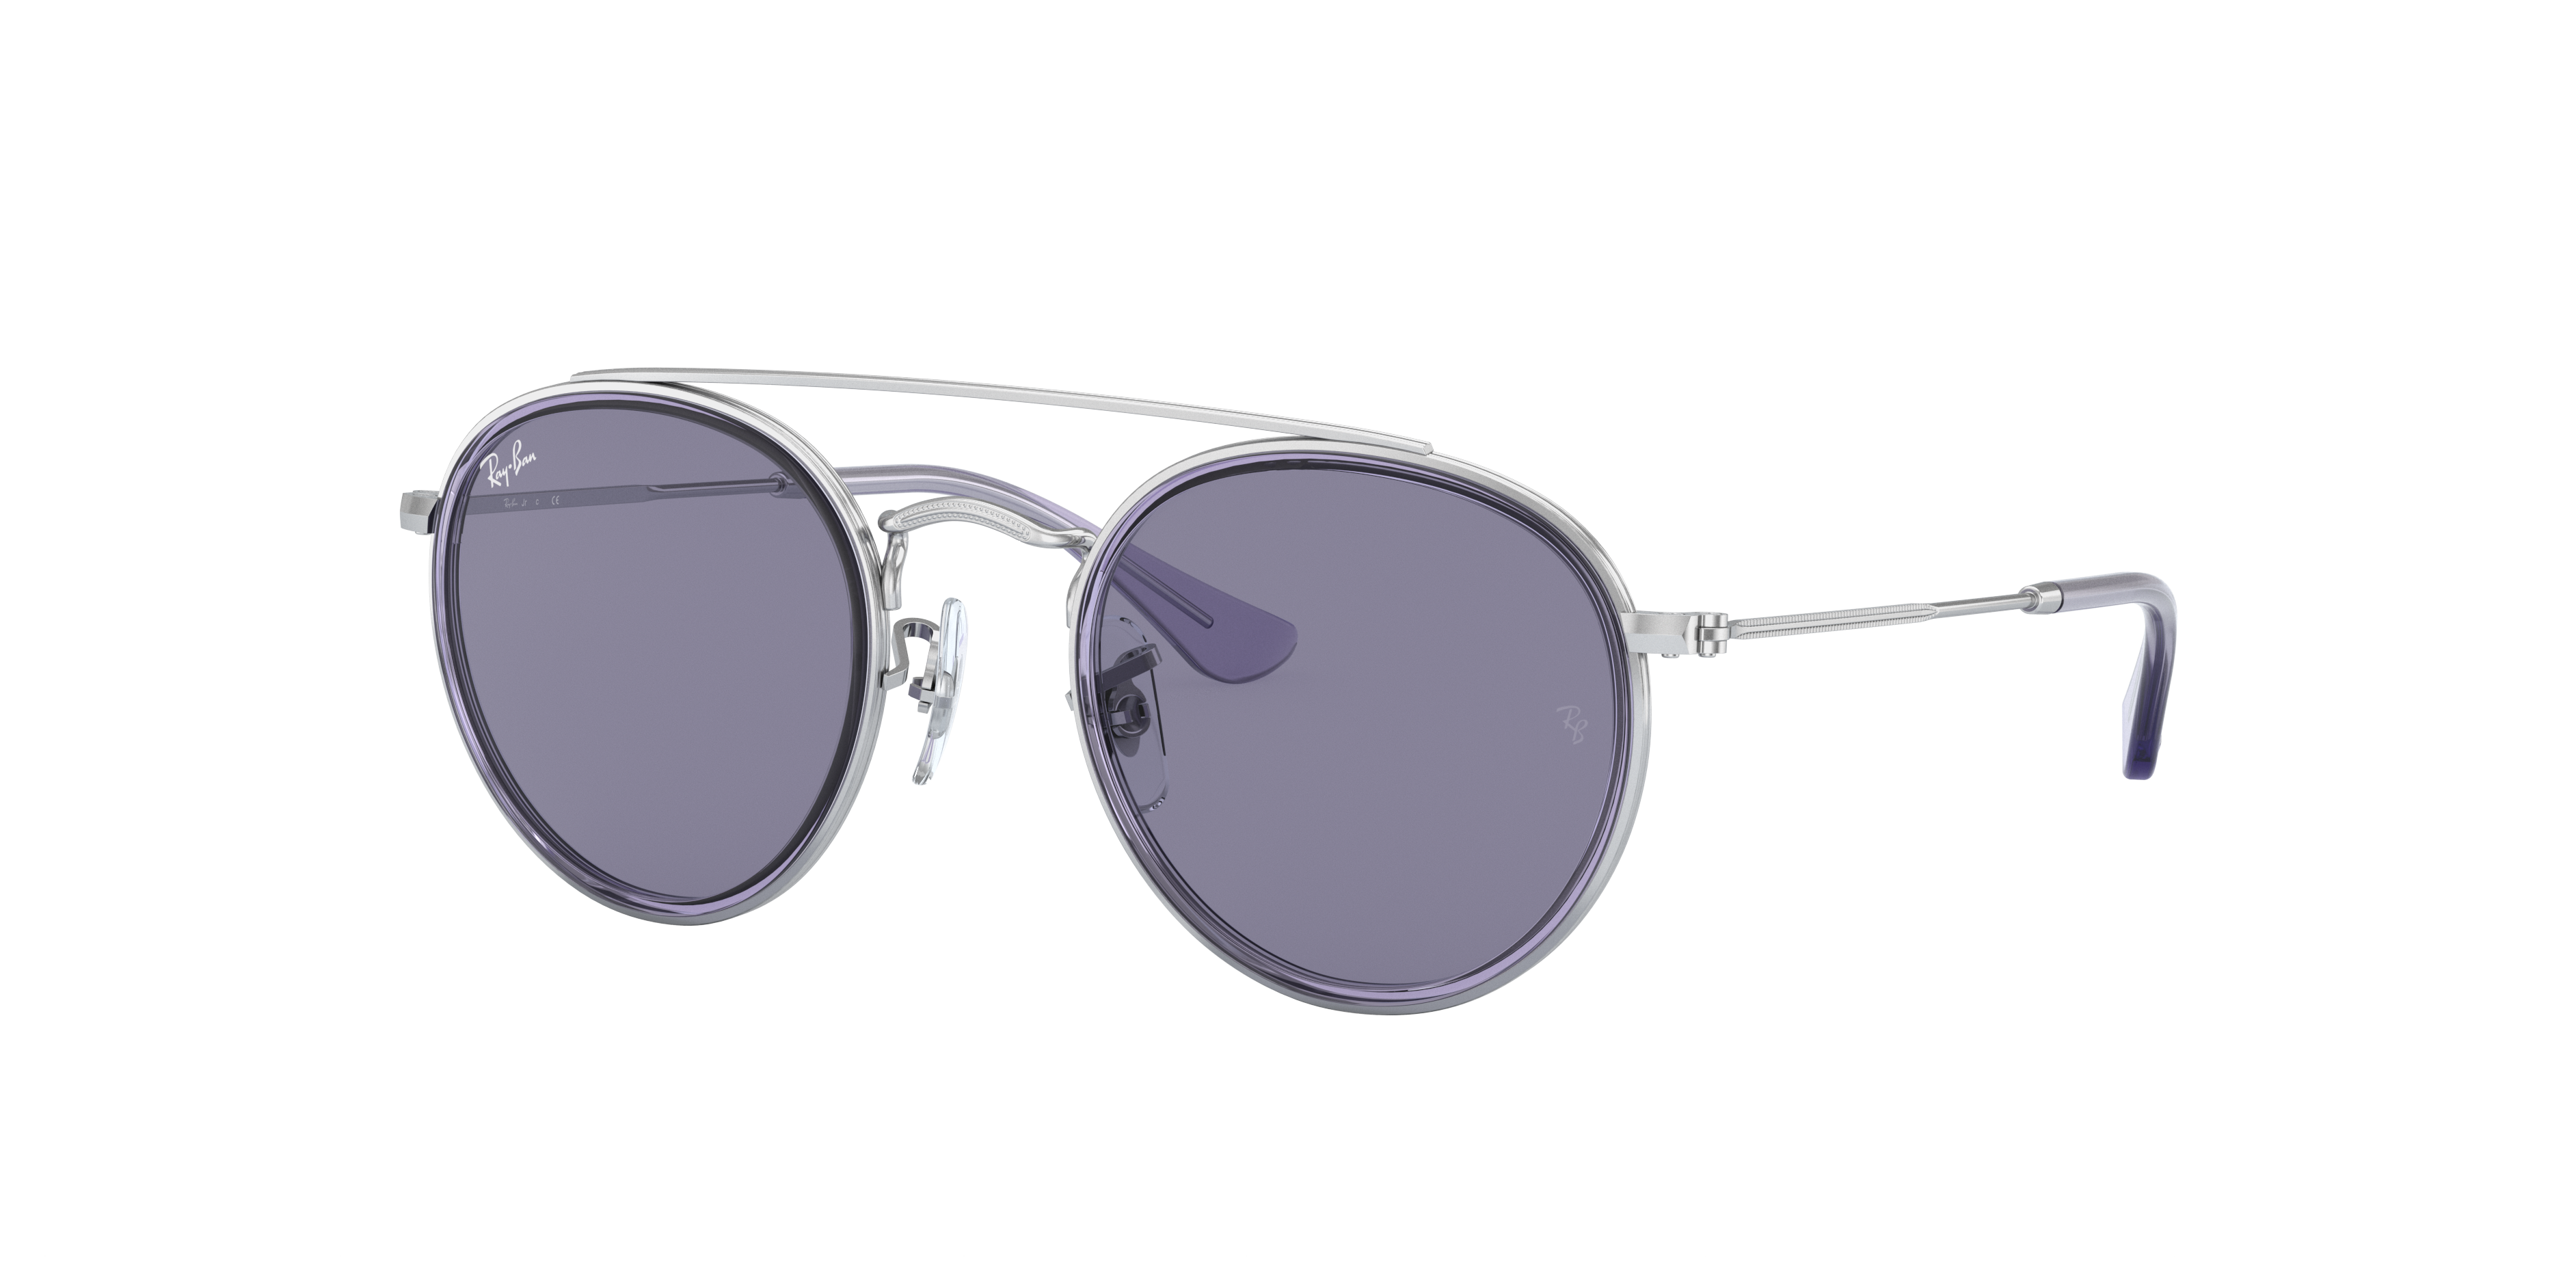 ray ban round silver